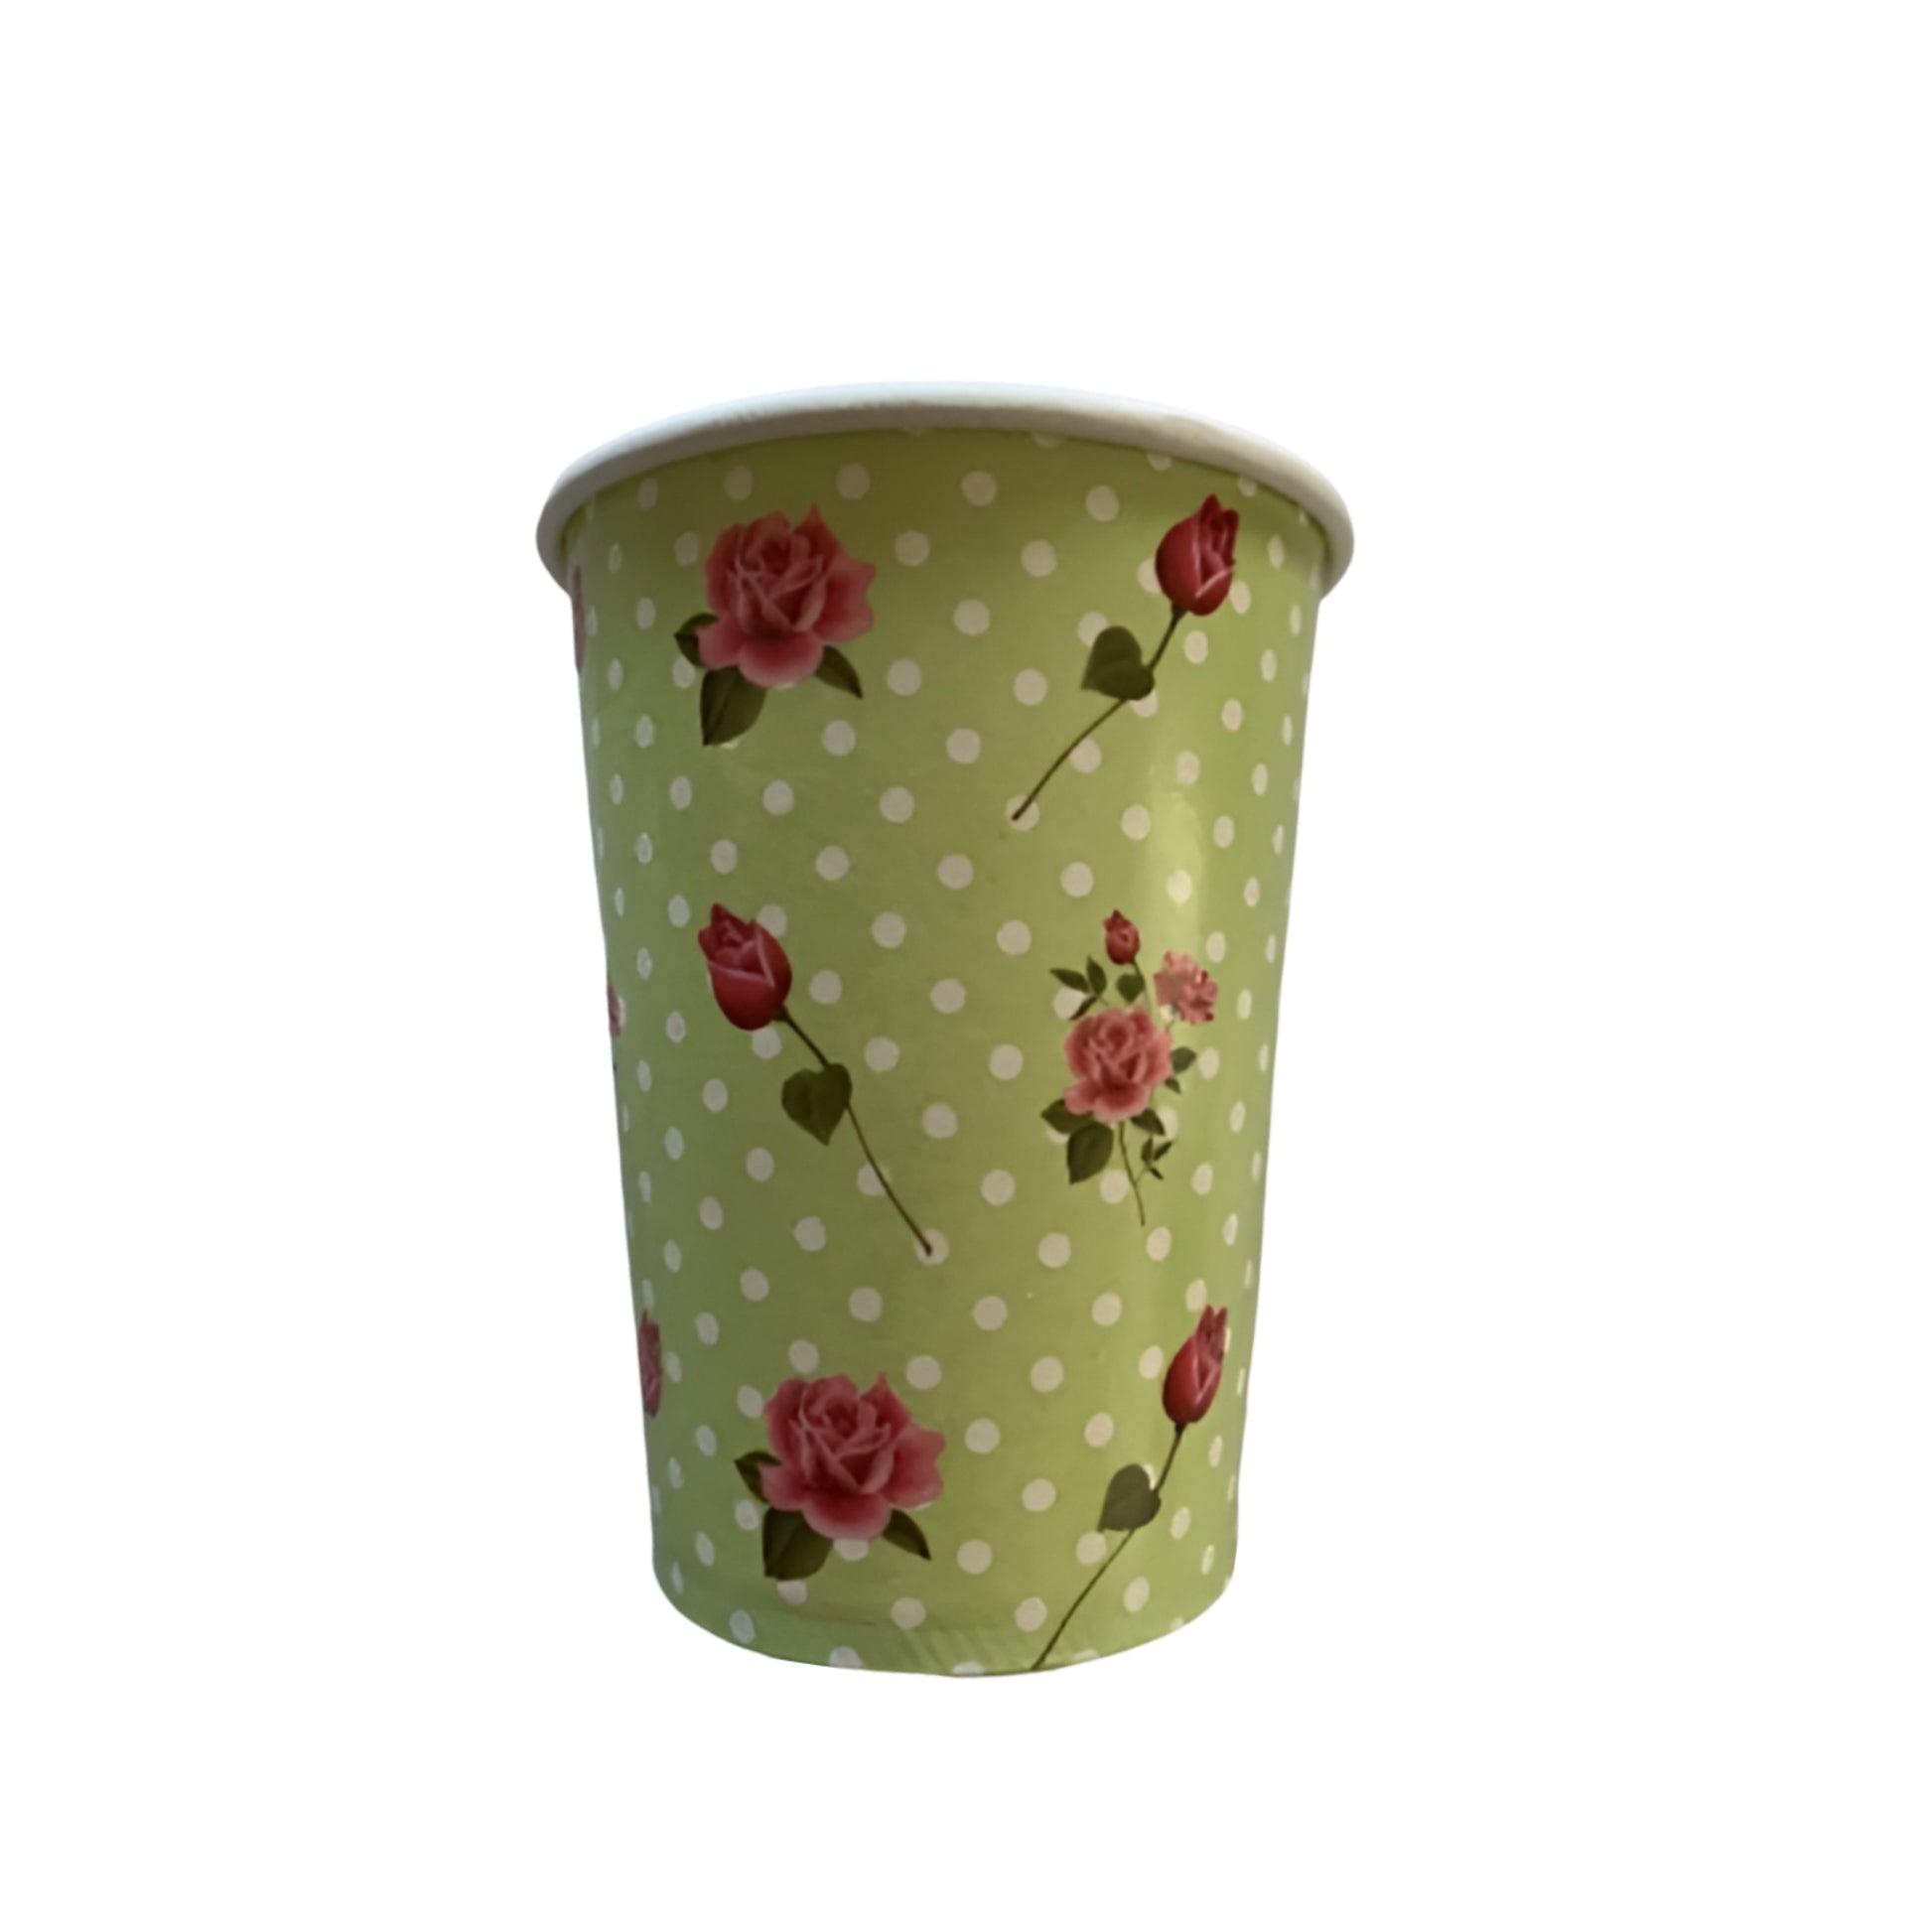 Whimsical Party Cups In Green With White Polka Dots & Red Roses